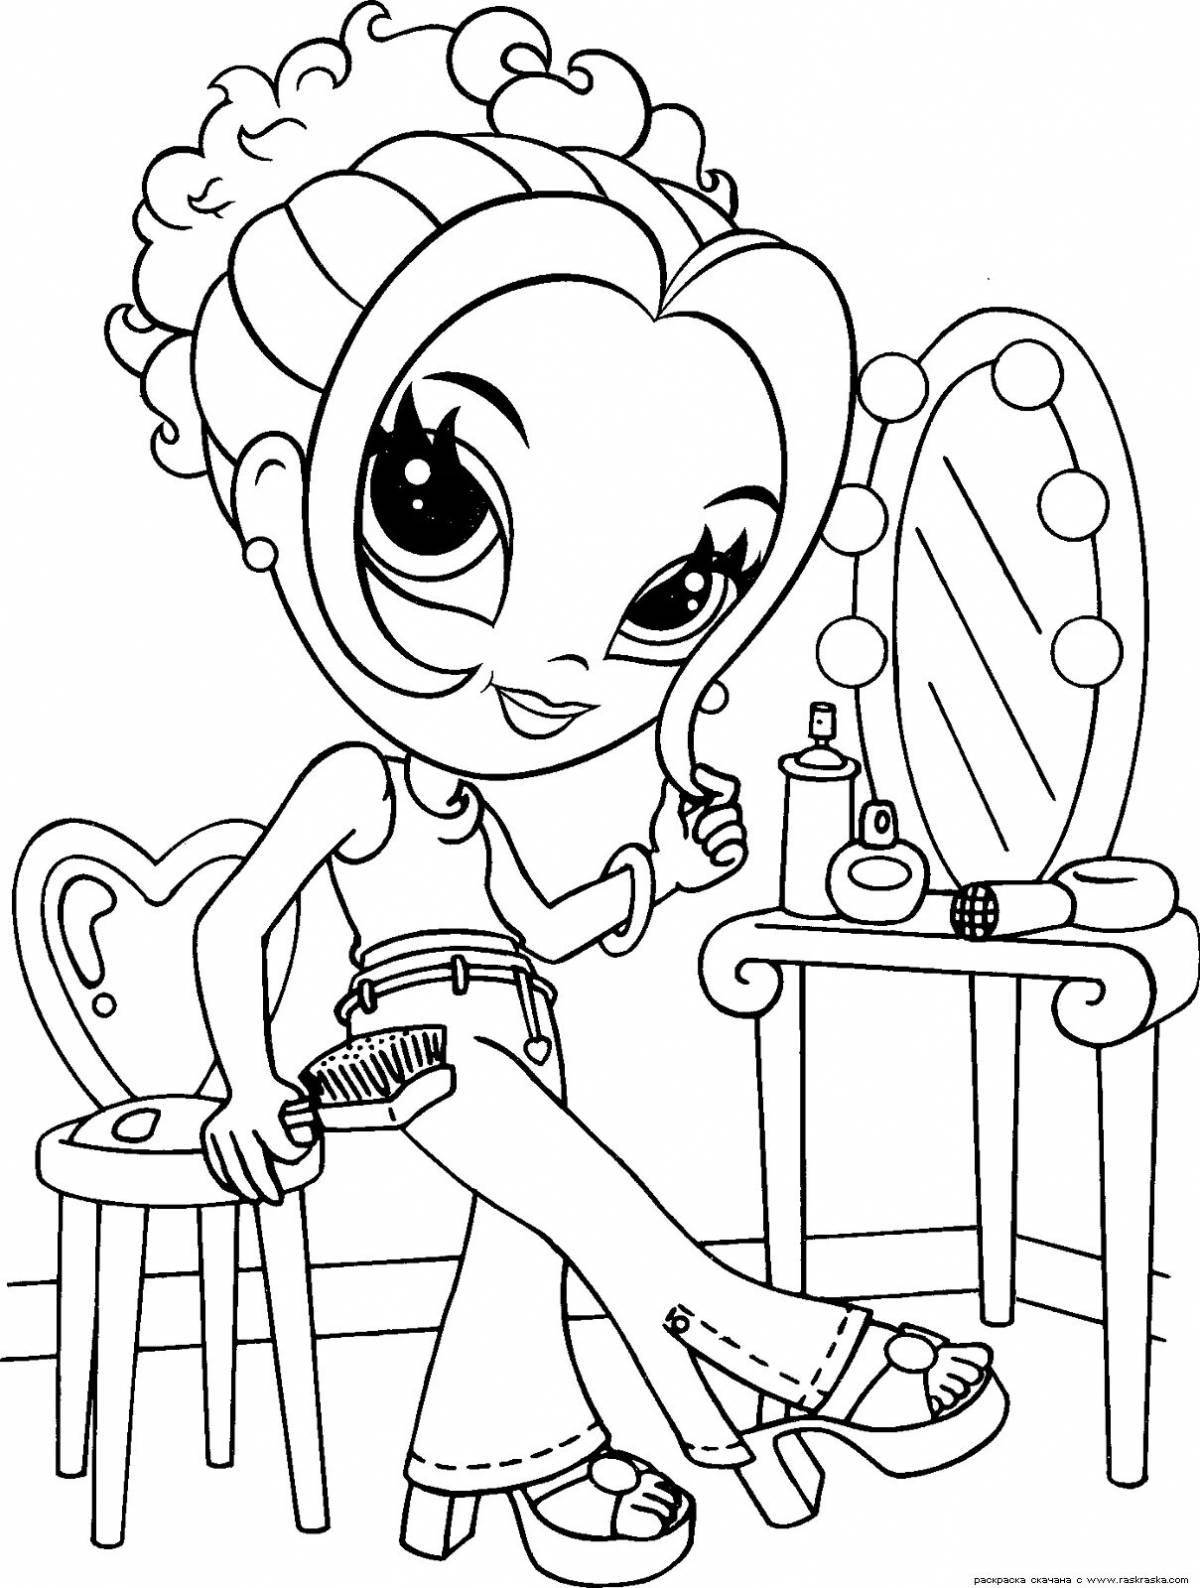 A playful coloring book popular with children